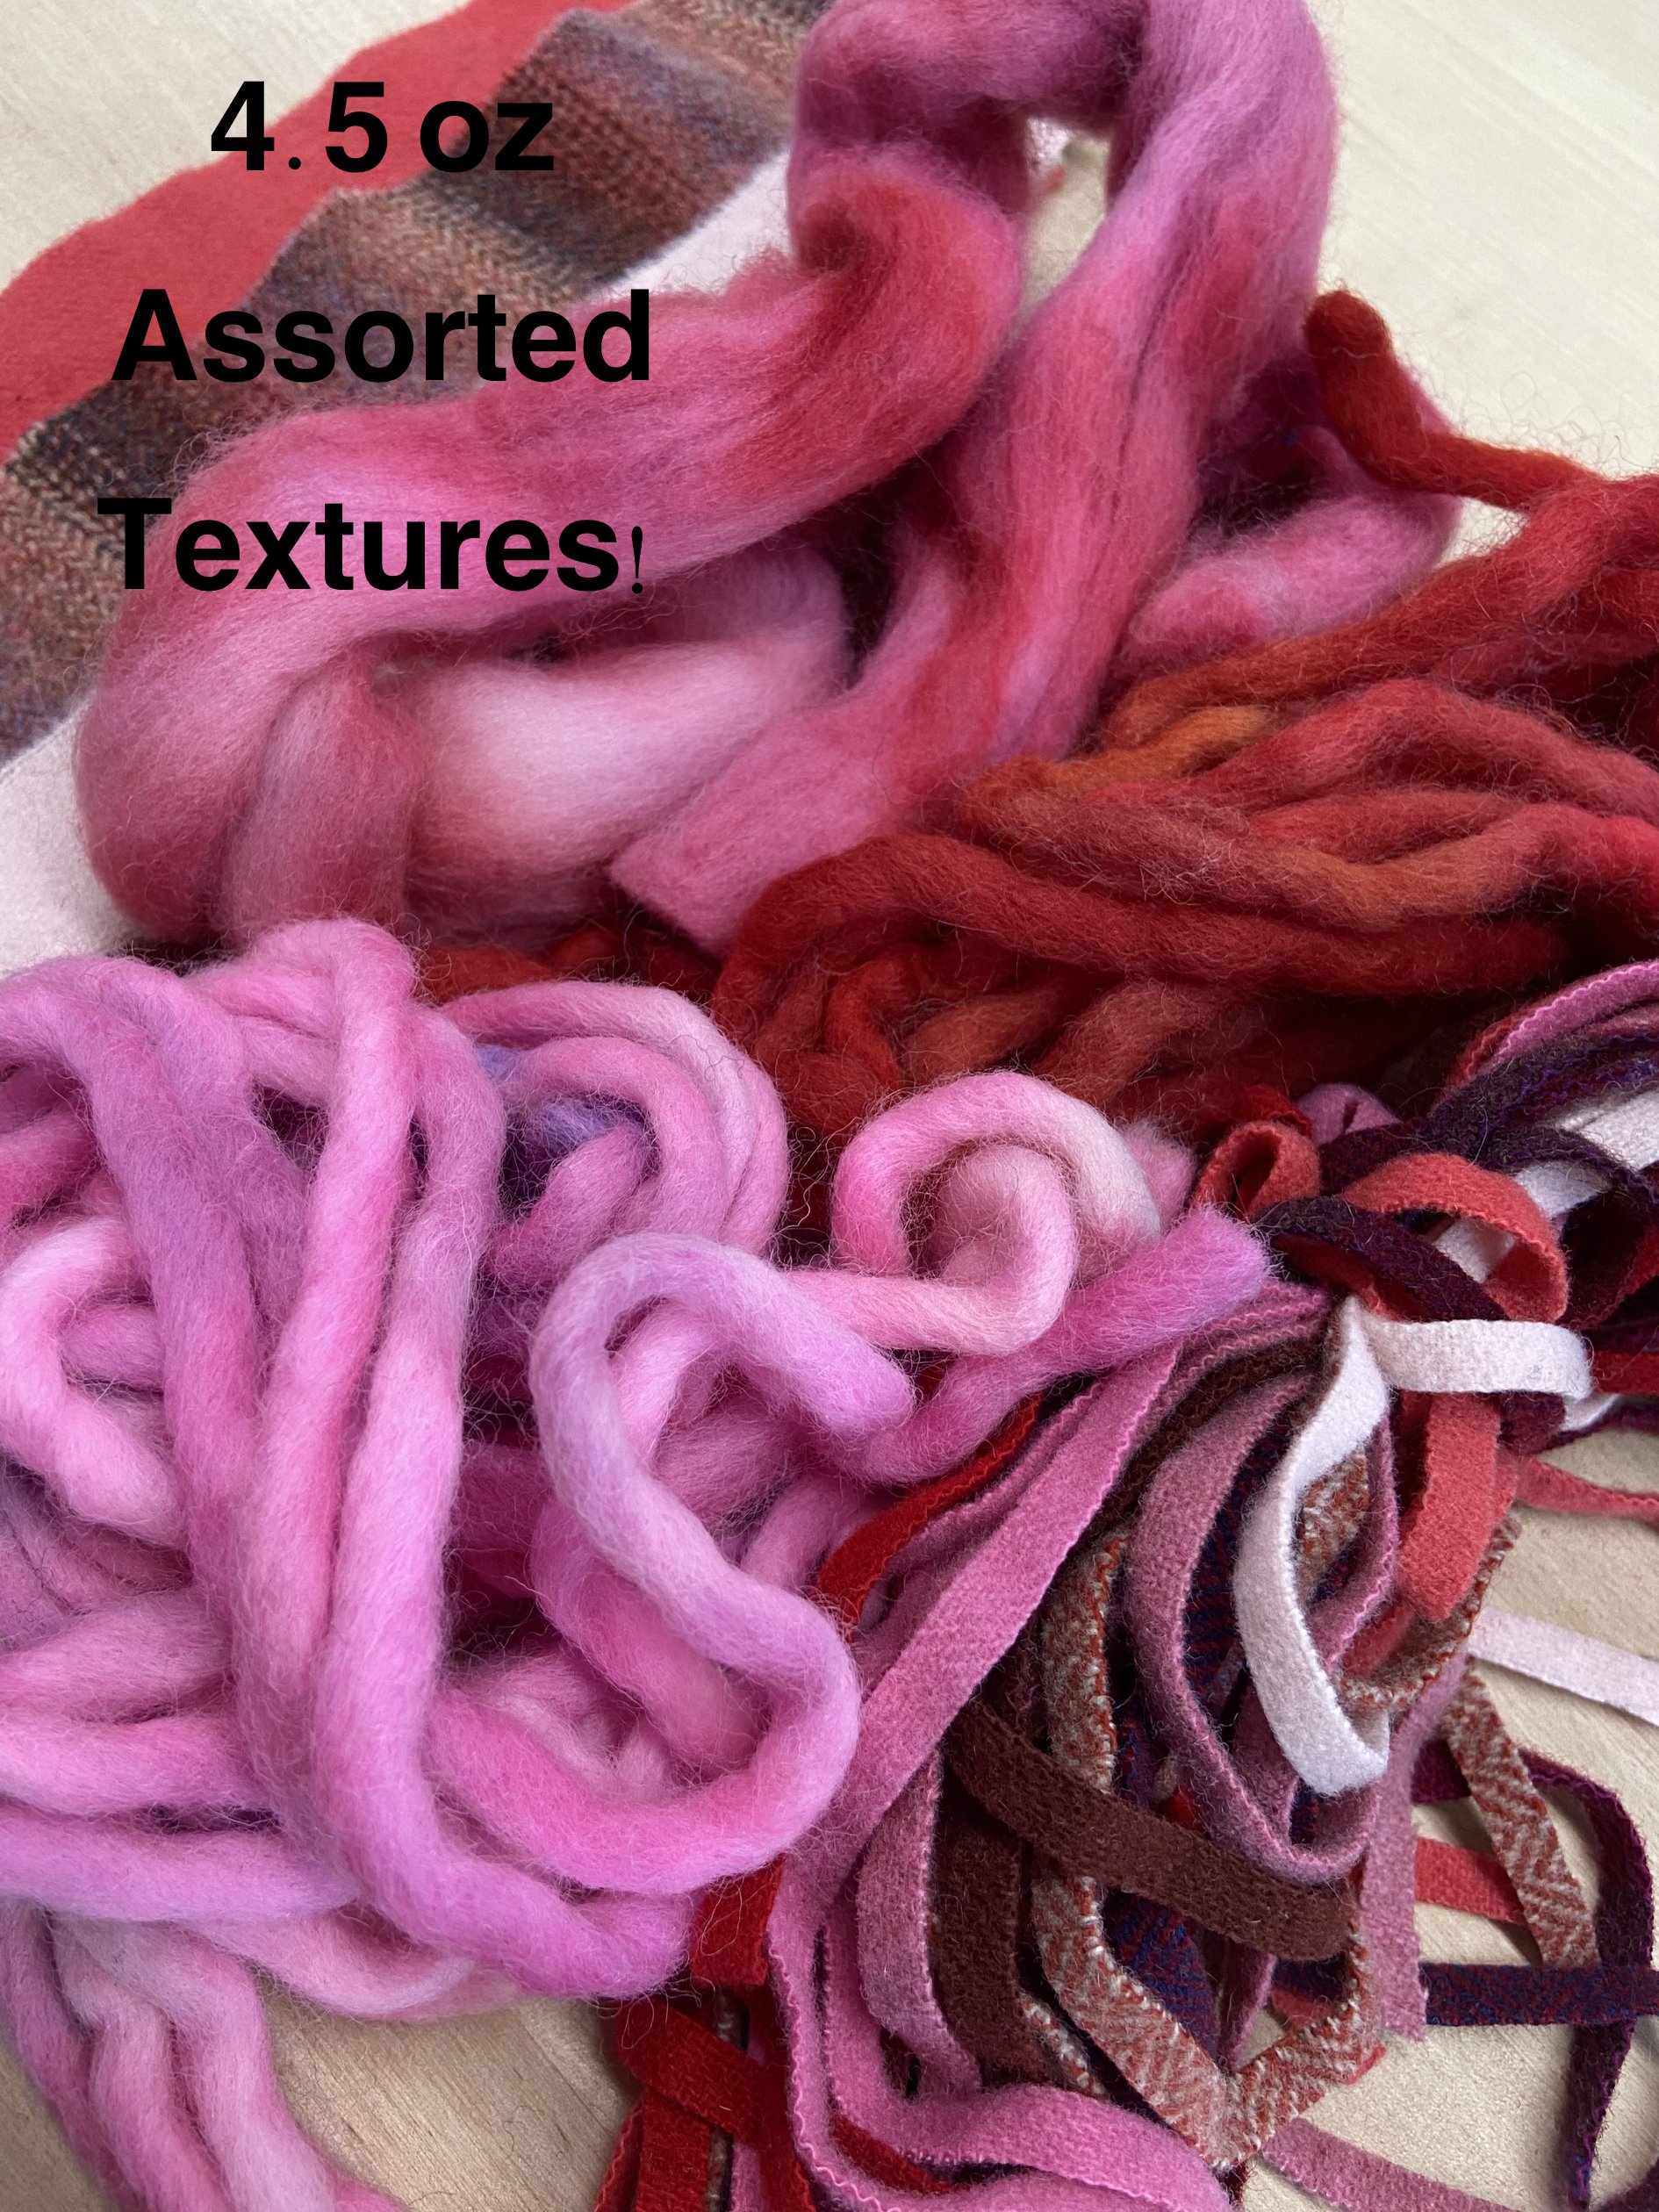 Super-Chunky Fuzzy Yarn with Amazing Texture!